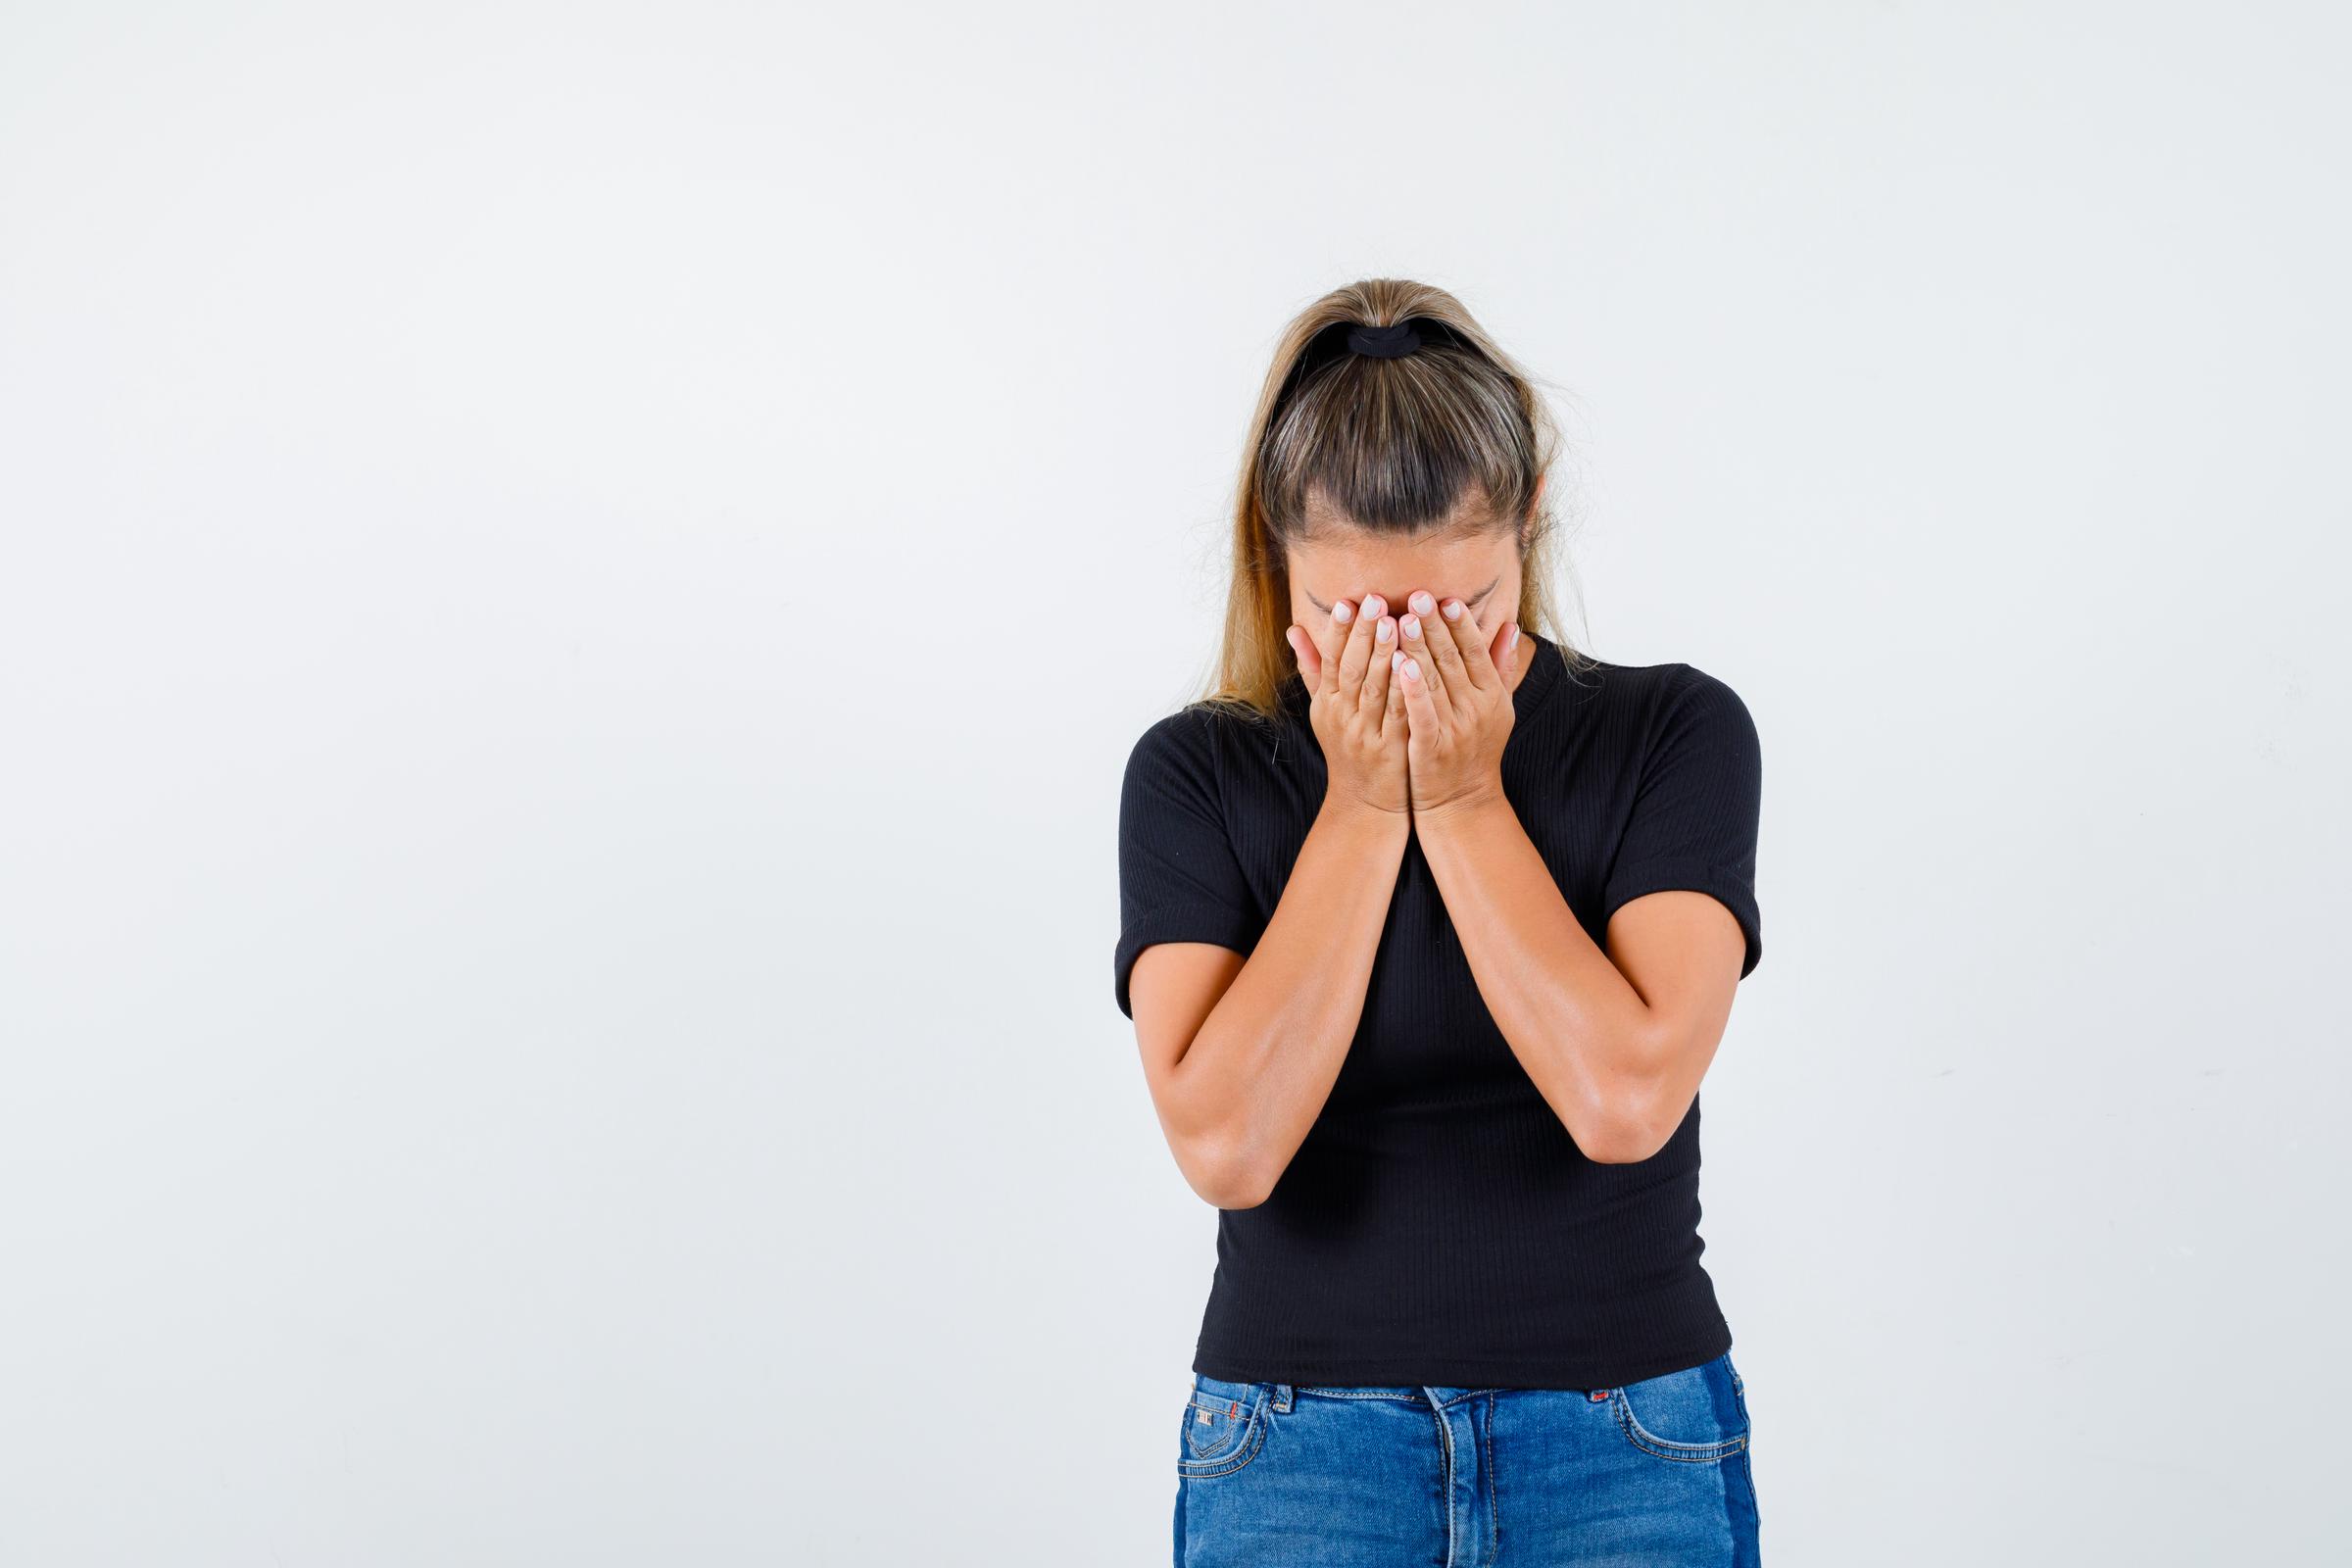 A woman hiding her face and crying | Source: Freepik